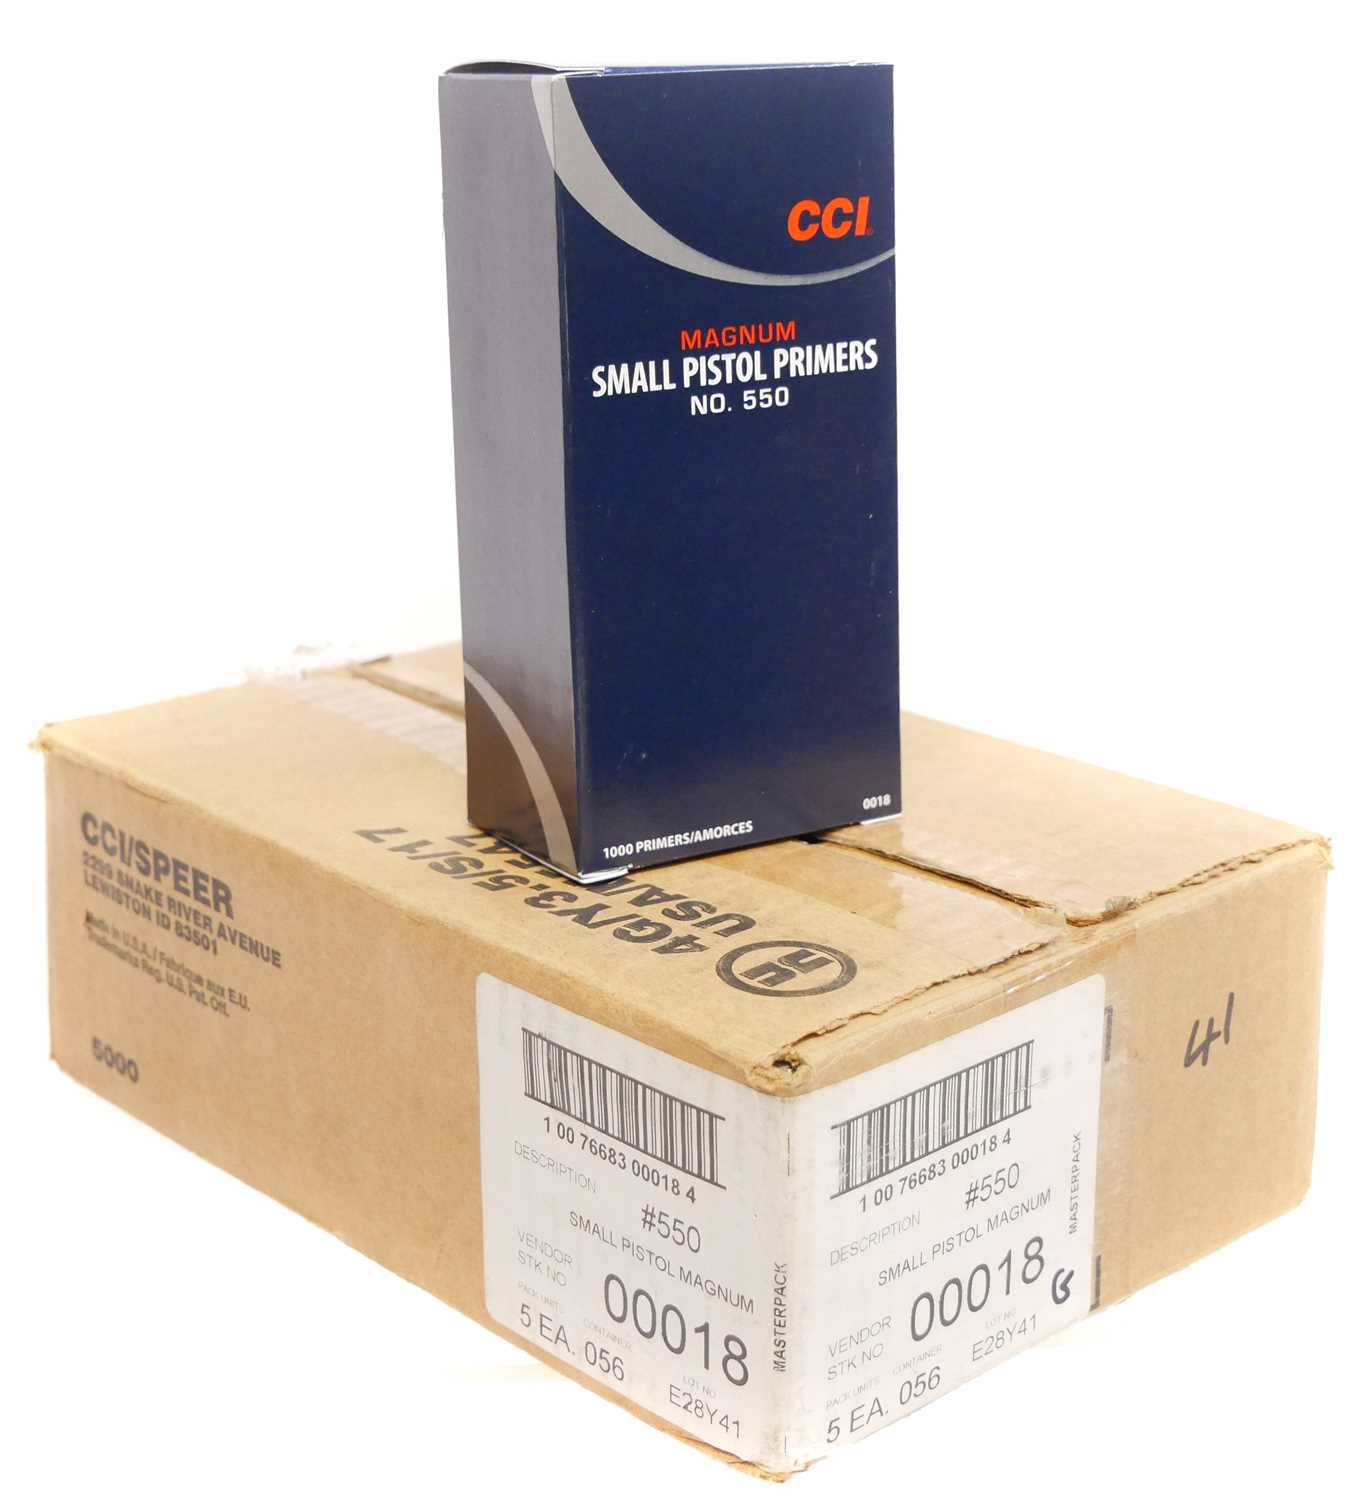 Five thousand CCI Magnum Small Pistol primers. UK FIREARMS LICENCE WITH A SMALL PISTOL CALIBRE OR